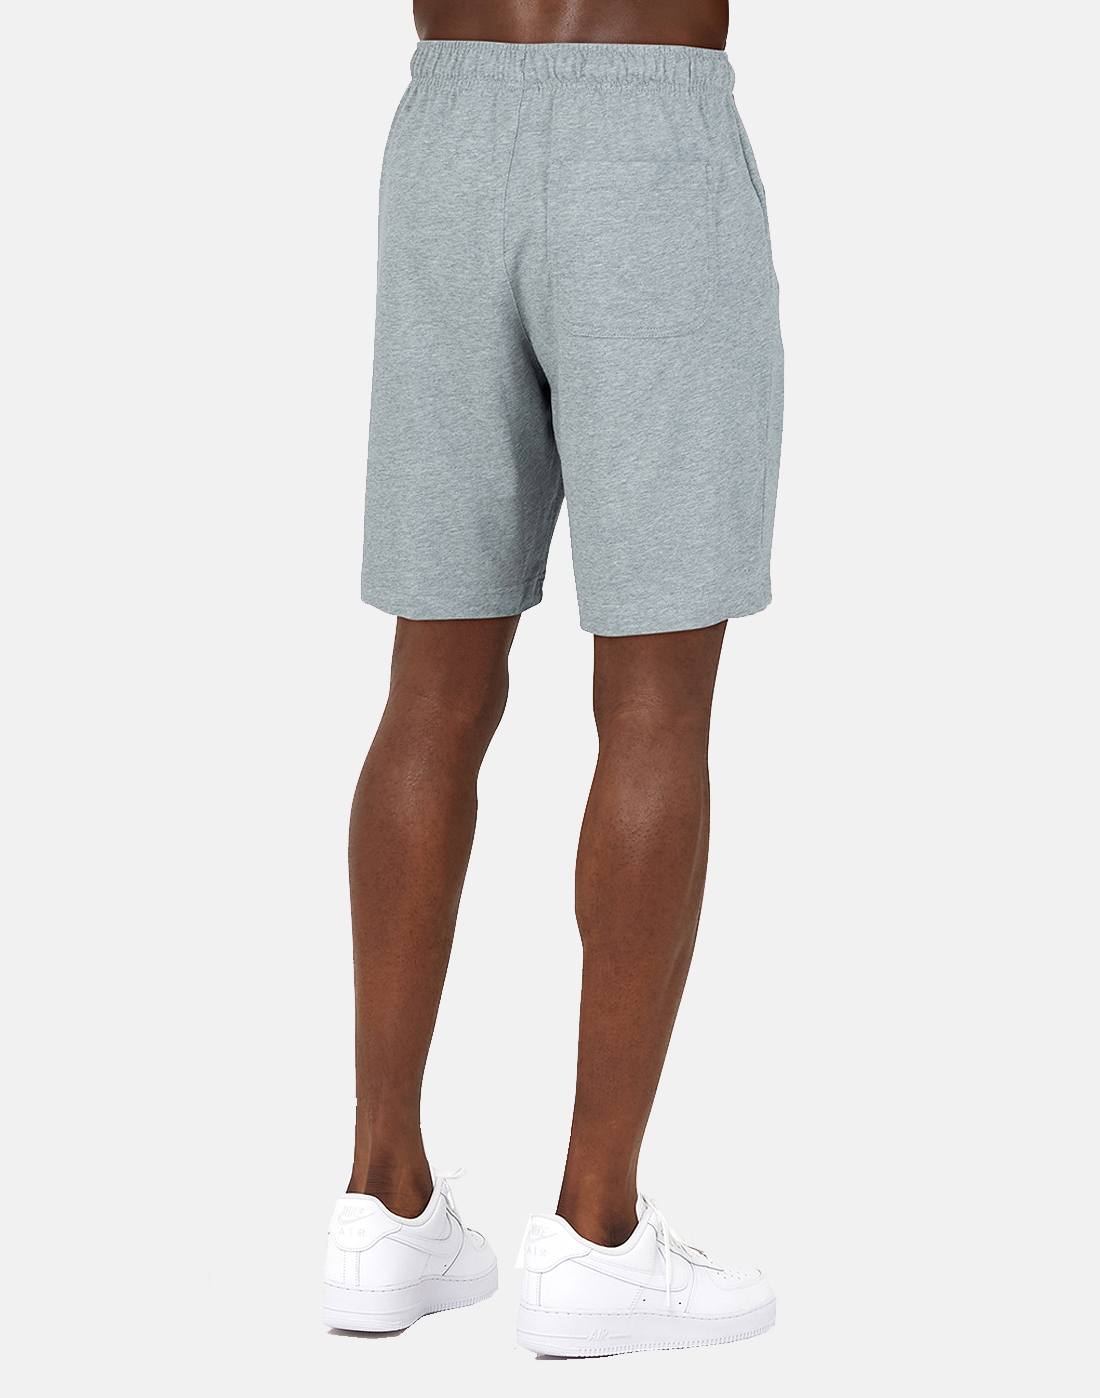 Nike Mens Jersey Club Shorts - Grey | Life Style Sports IE